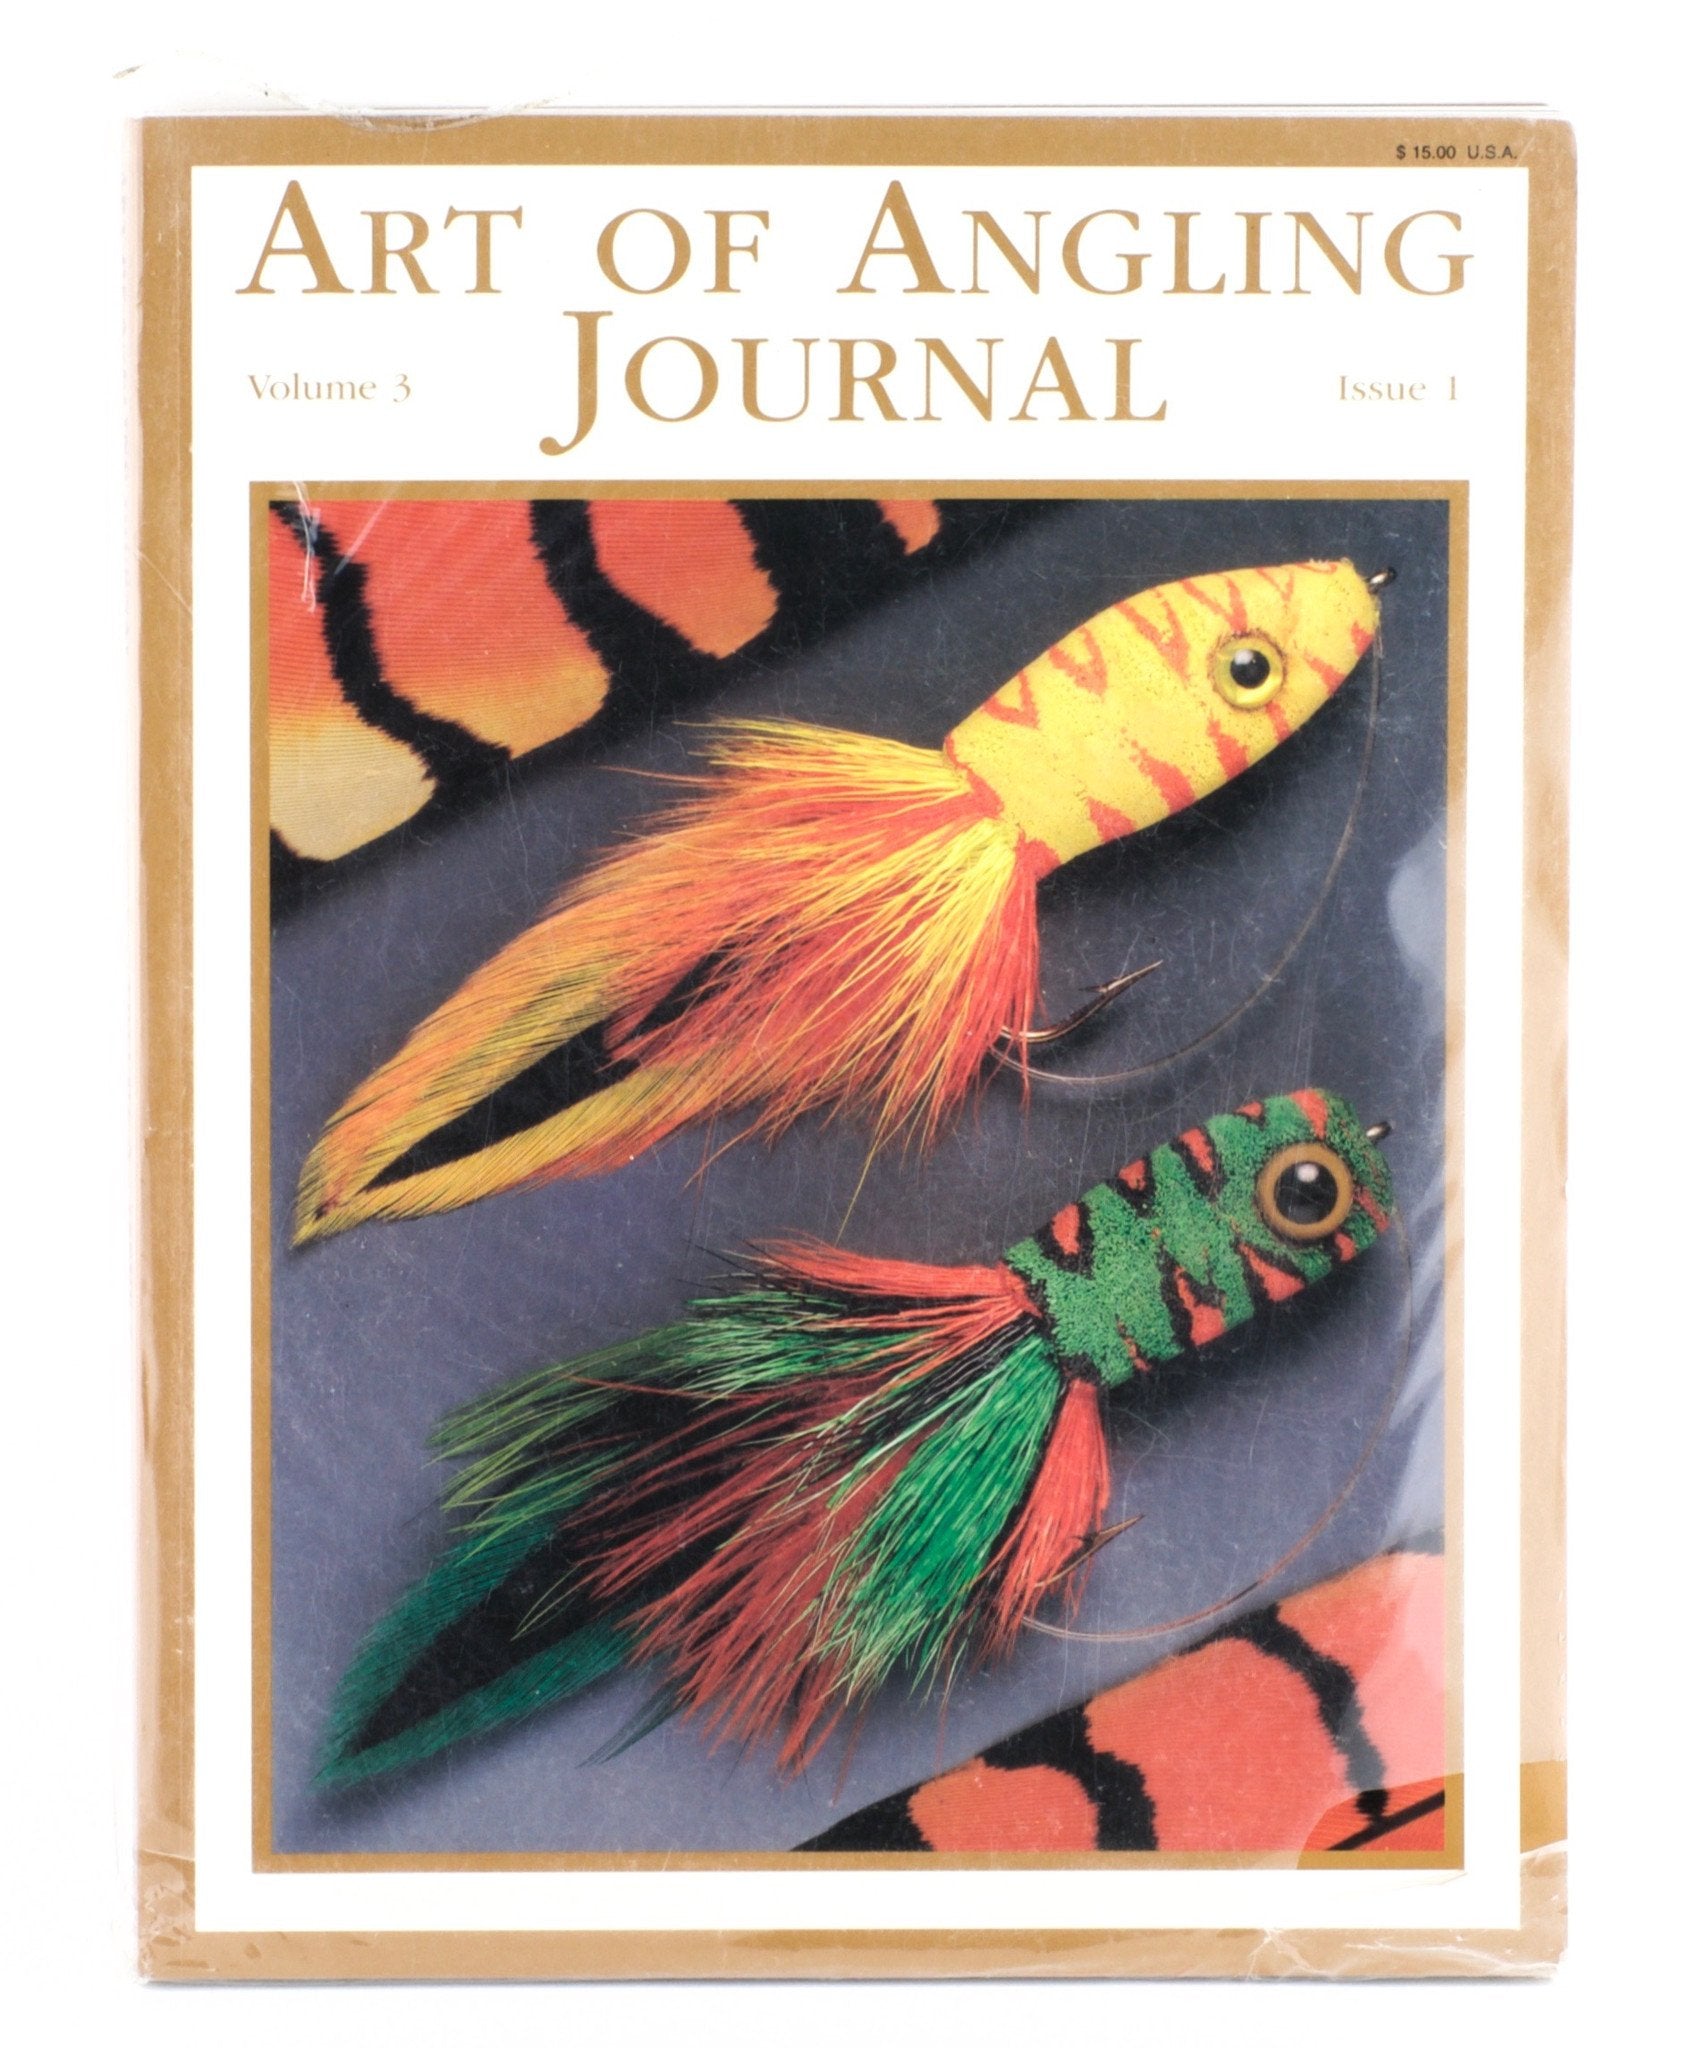 Art of Angling Journal - Volume 3 Issue 1